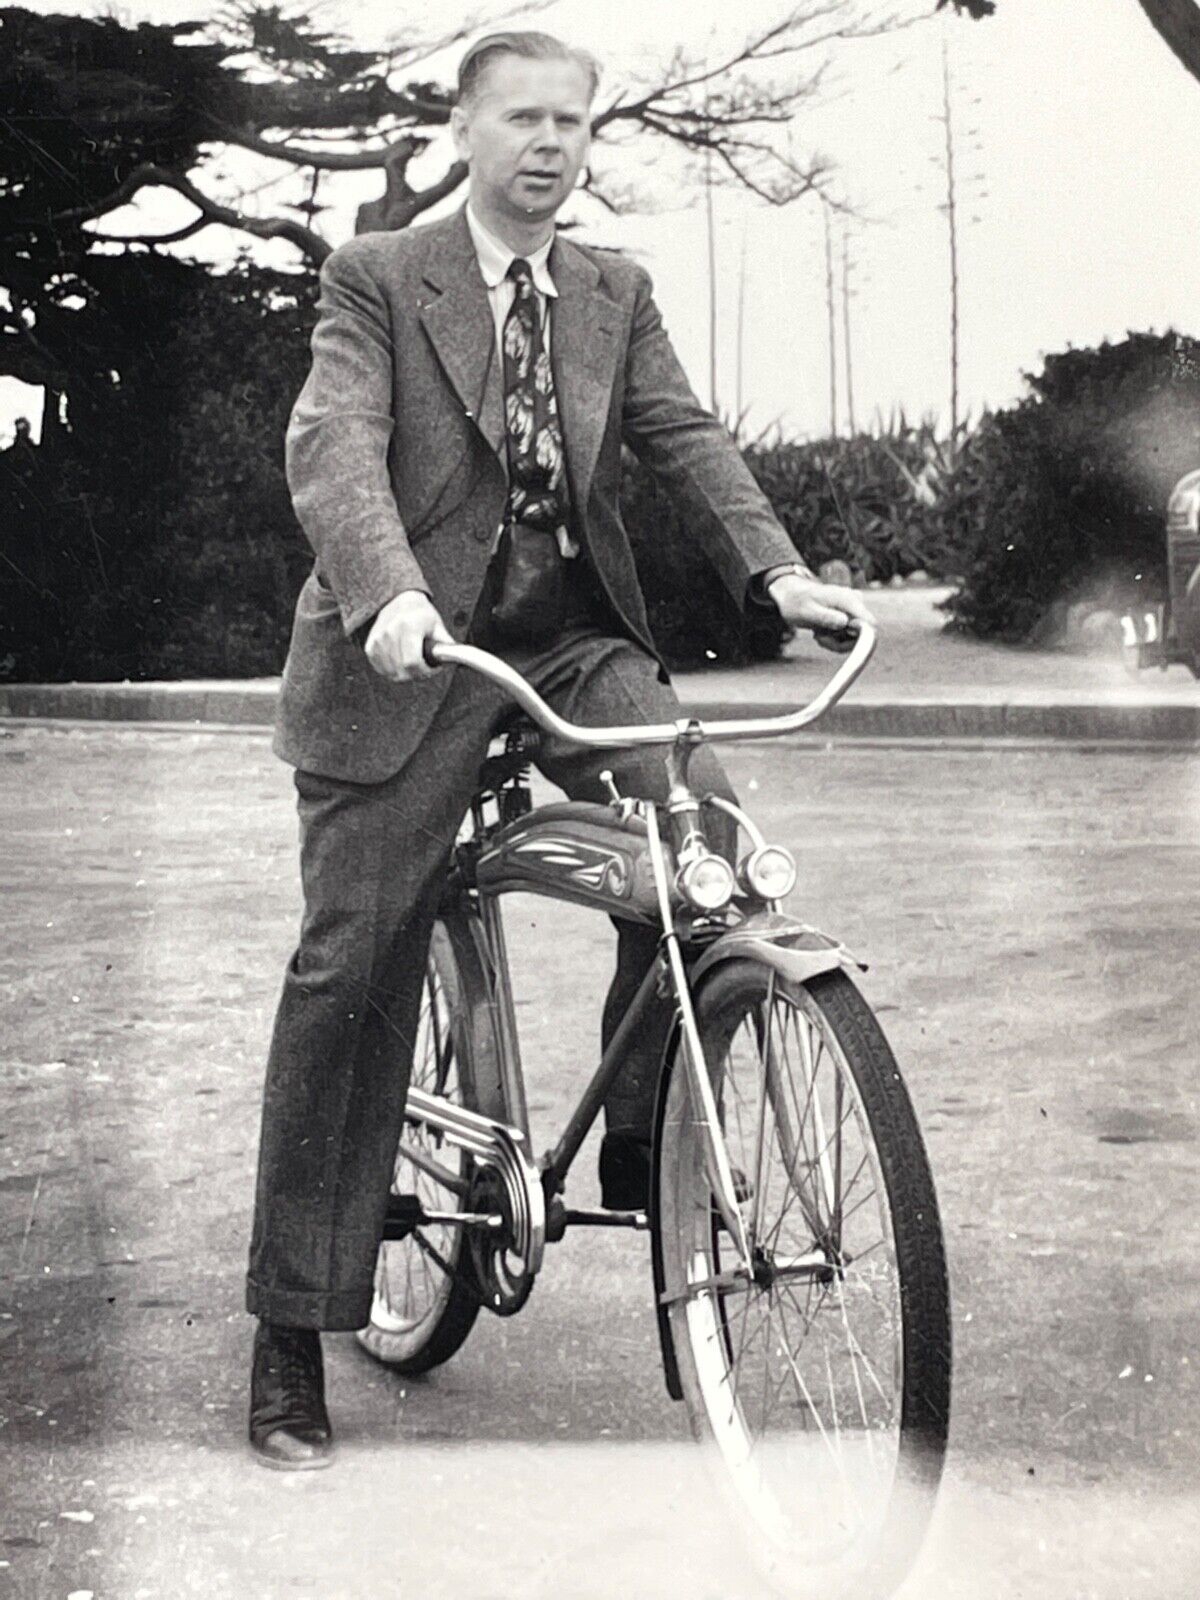 S5 Photograph Handsome Man Suit On Bicycle Pacific Grove California 1943